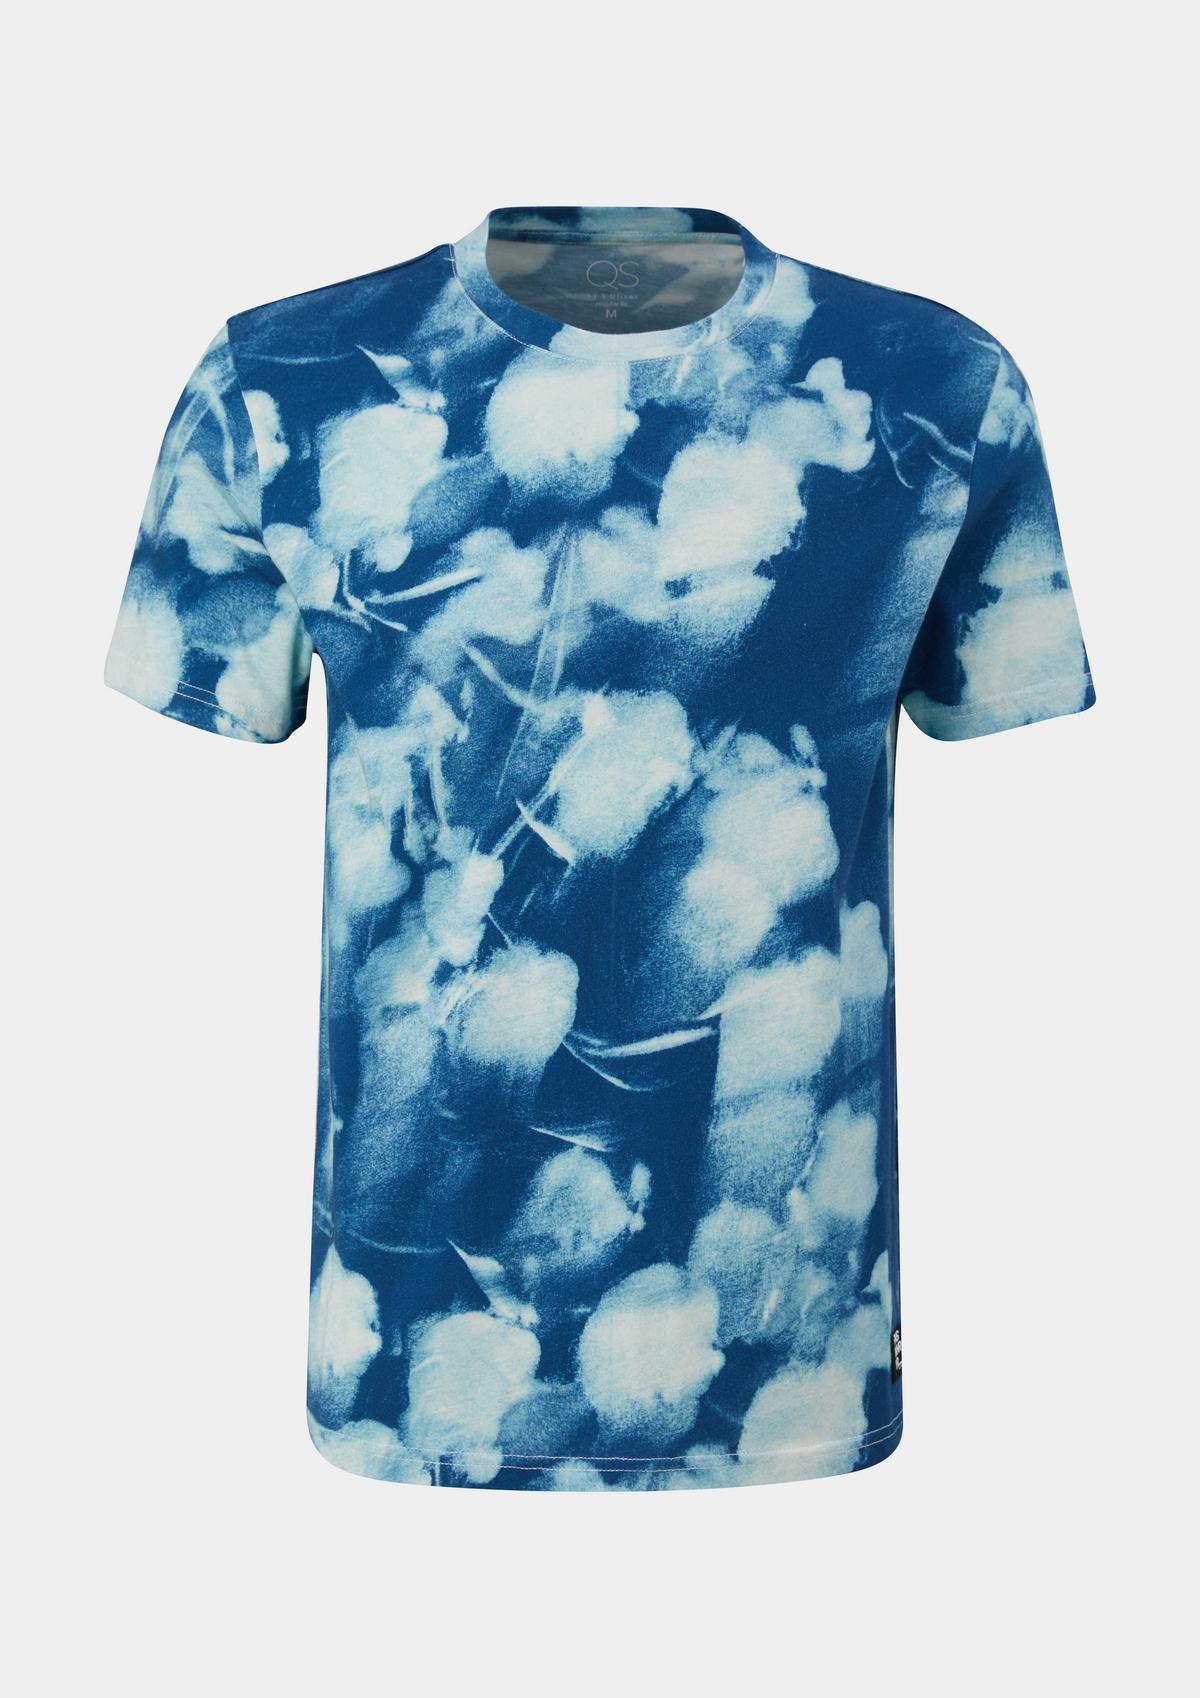 all-over T-shirt with an blue - dark print